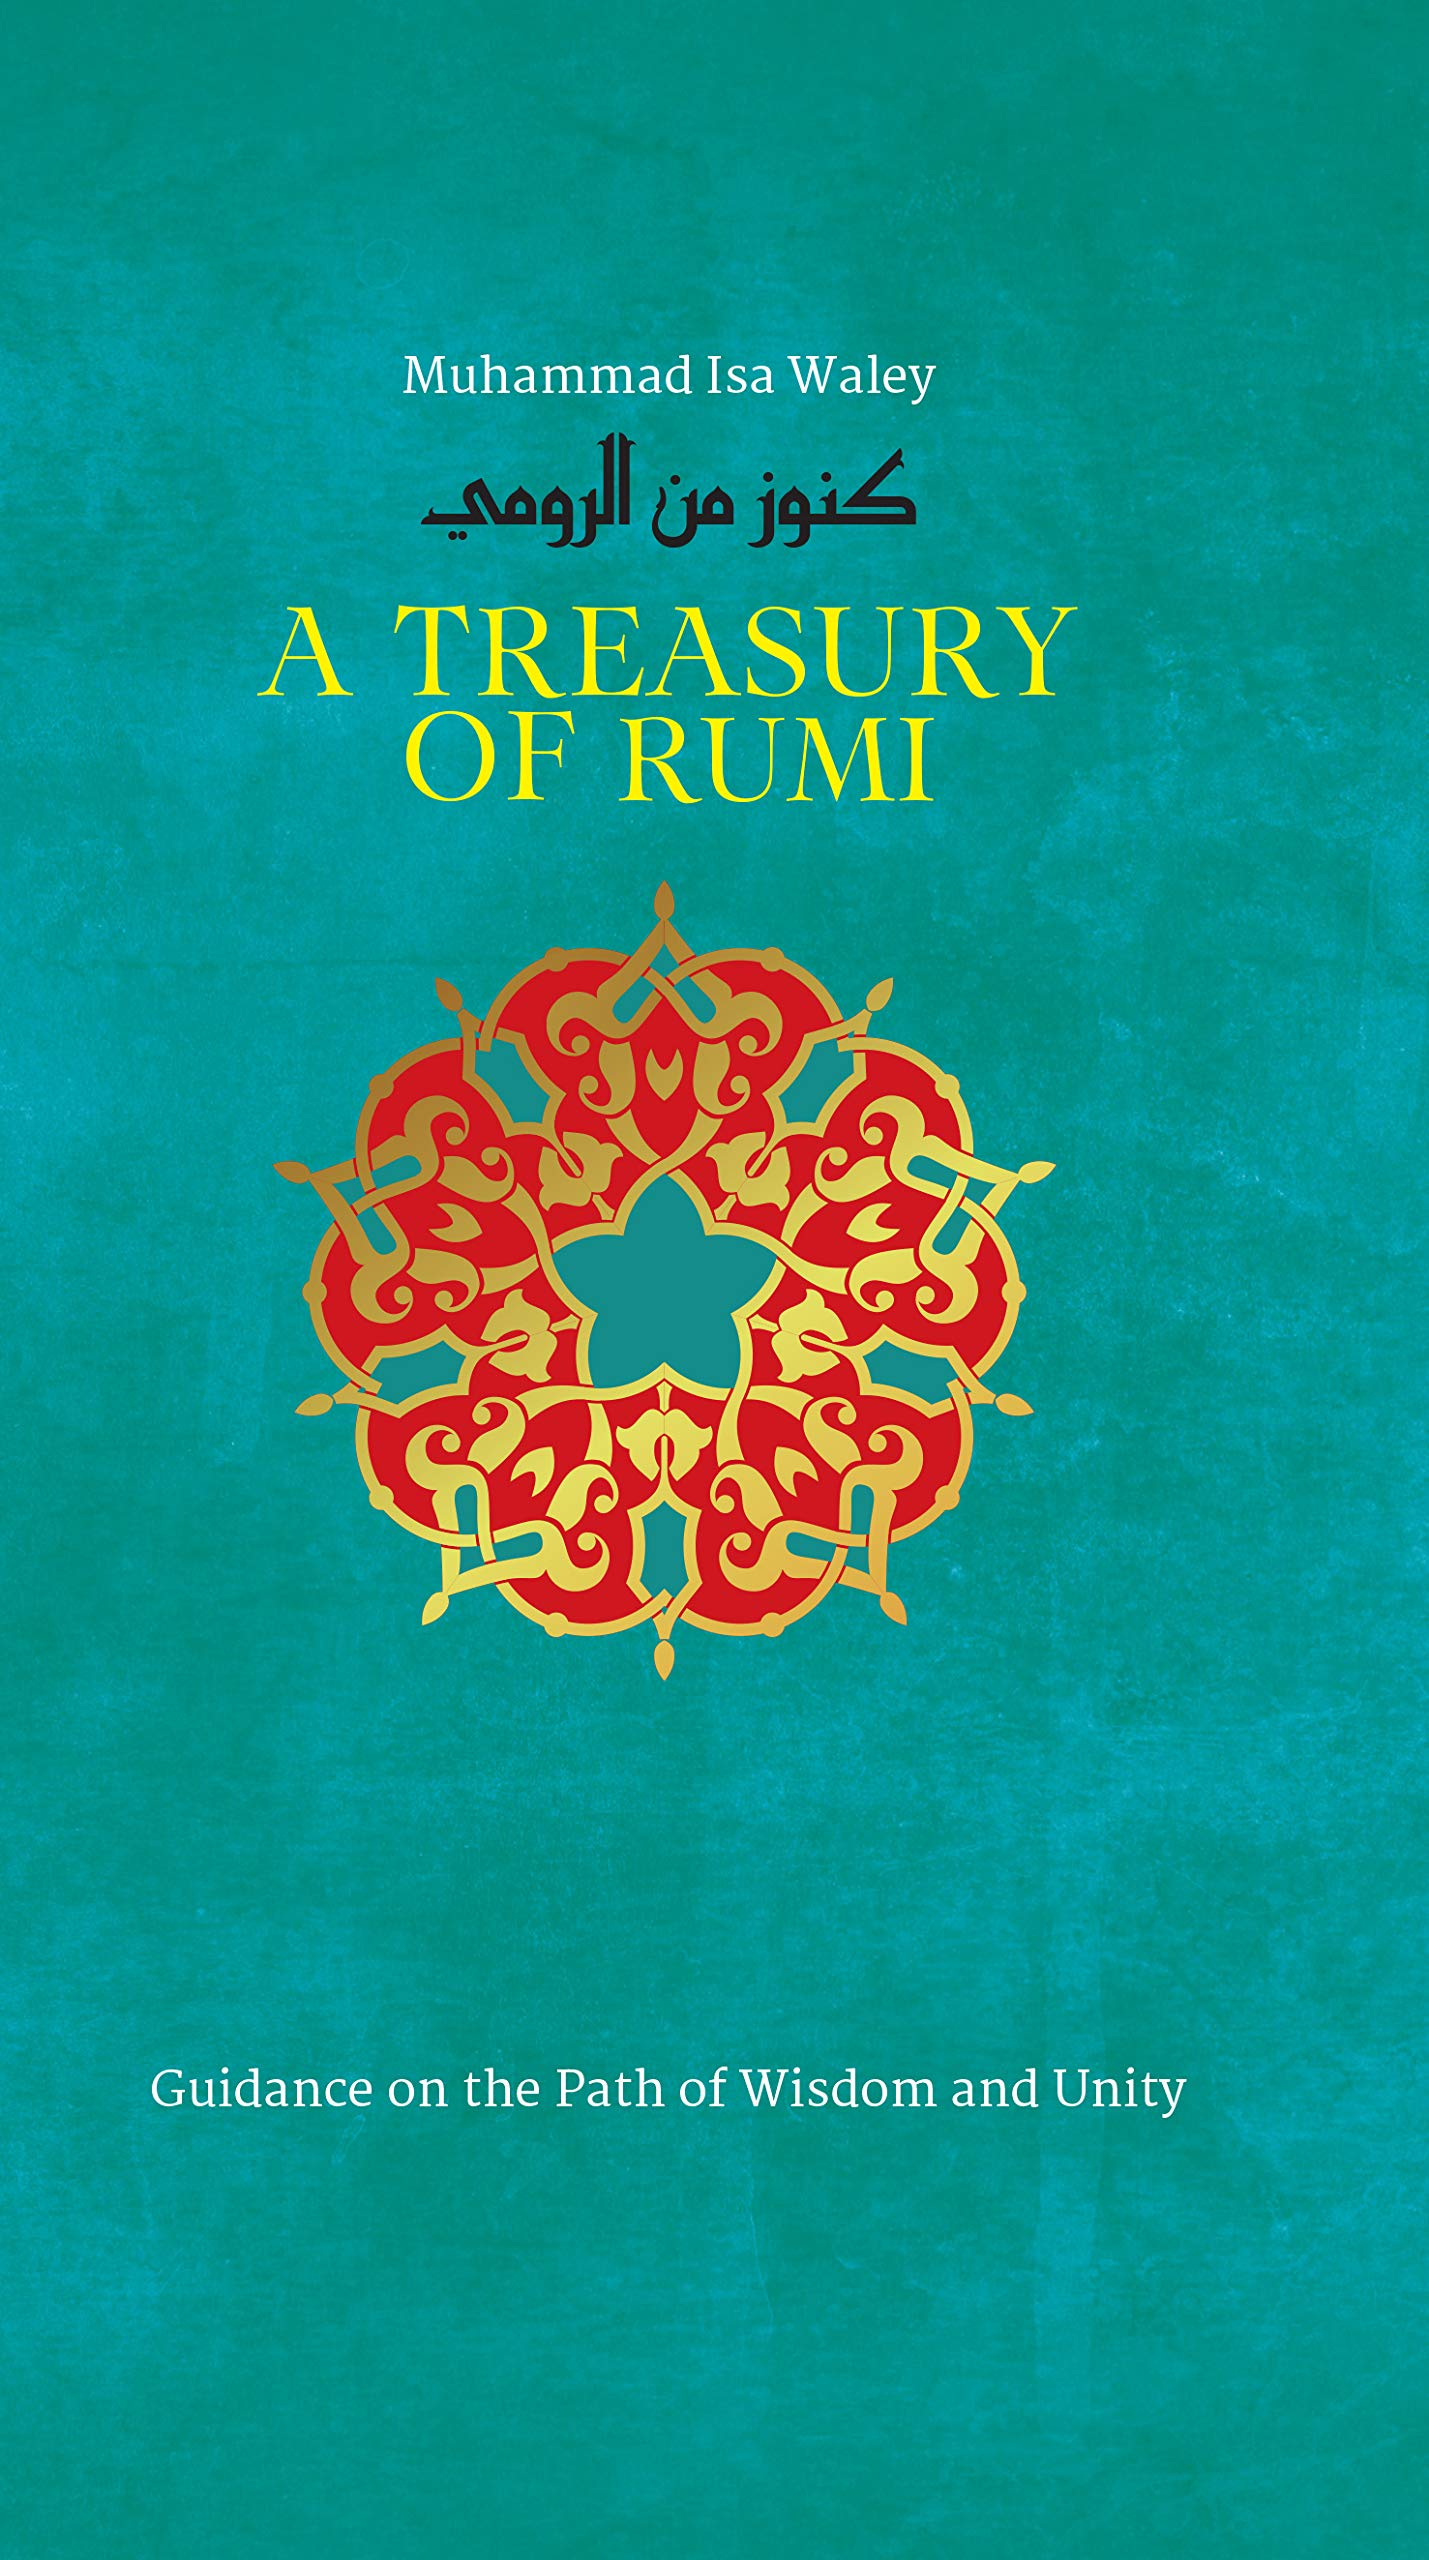 A Treasury of Rumi: Guidance on the Path of Wisdom and Unity